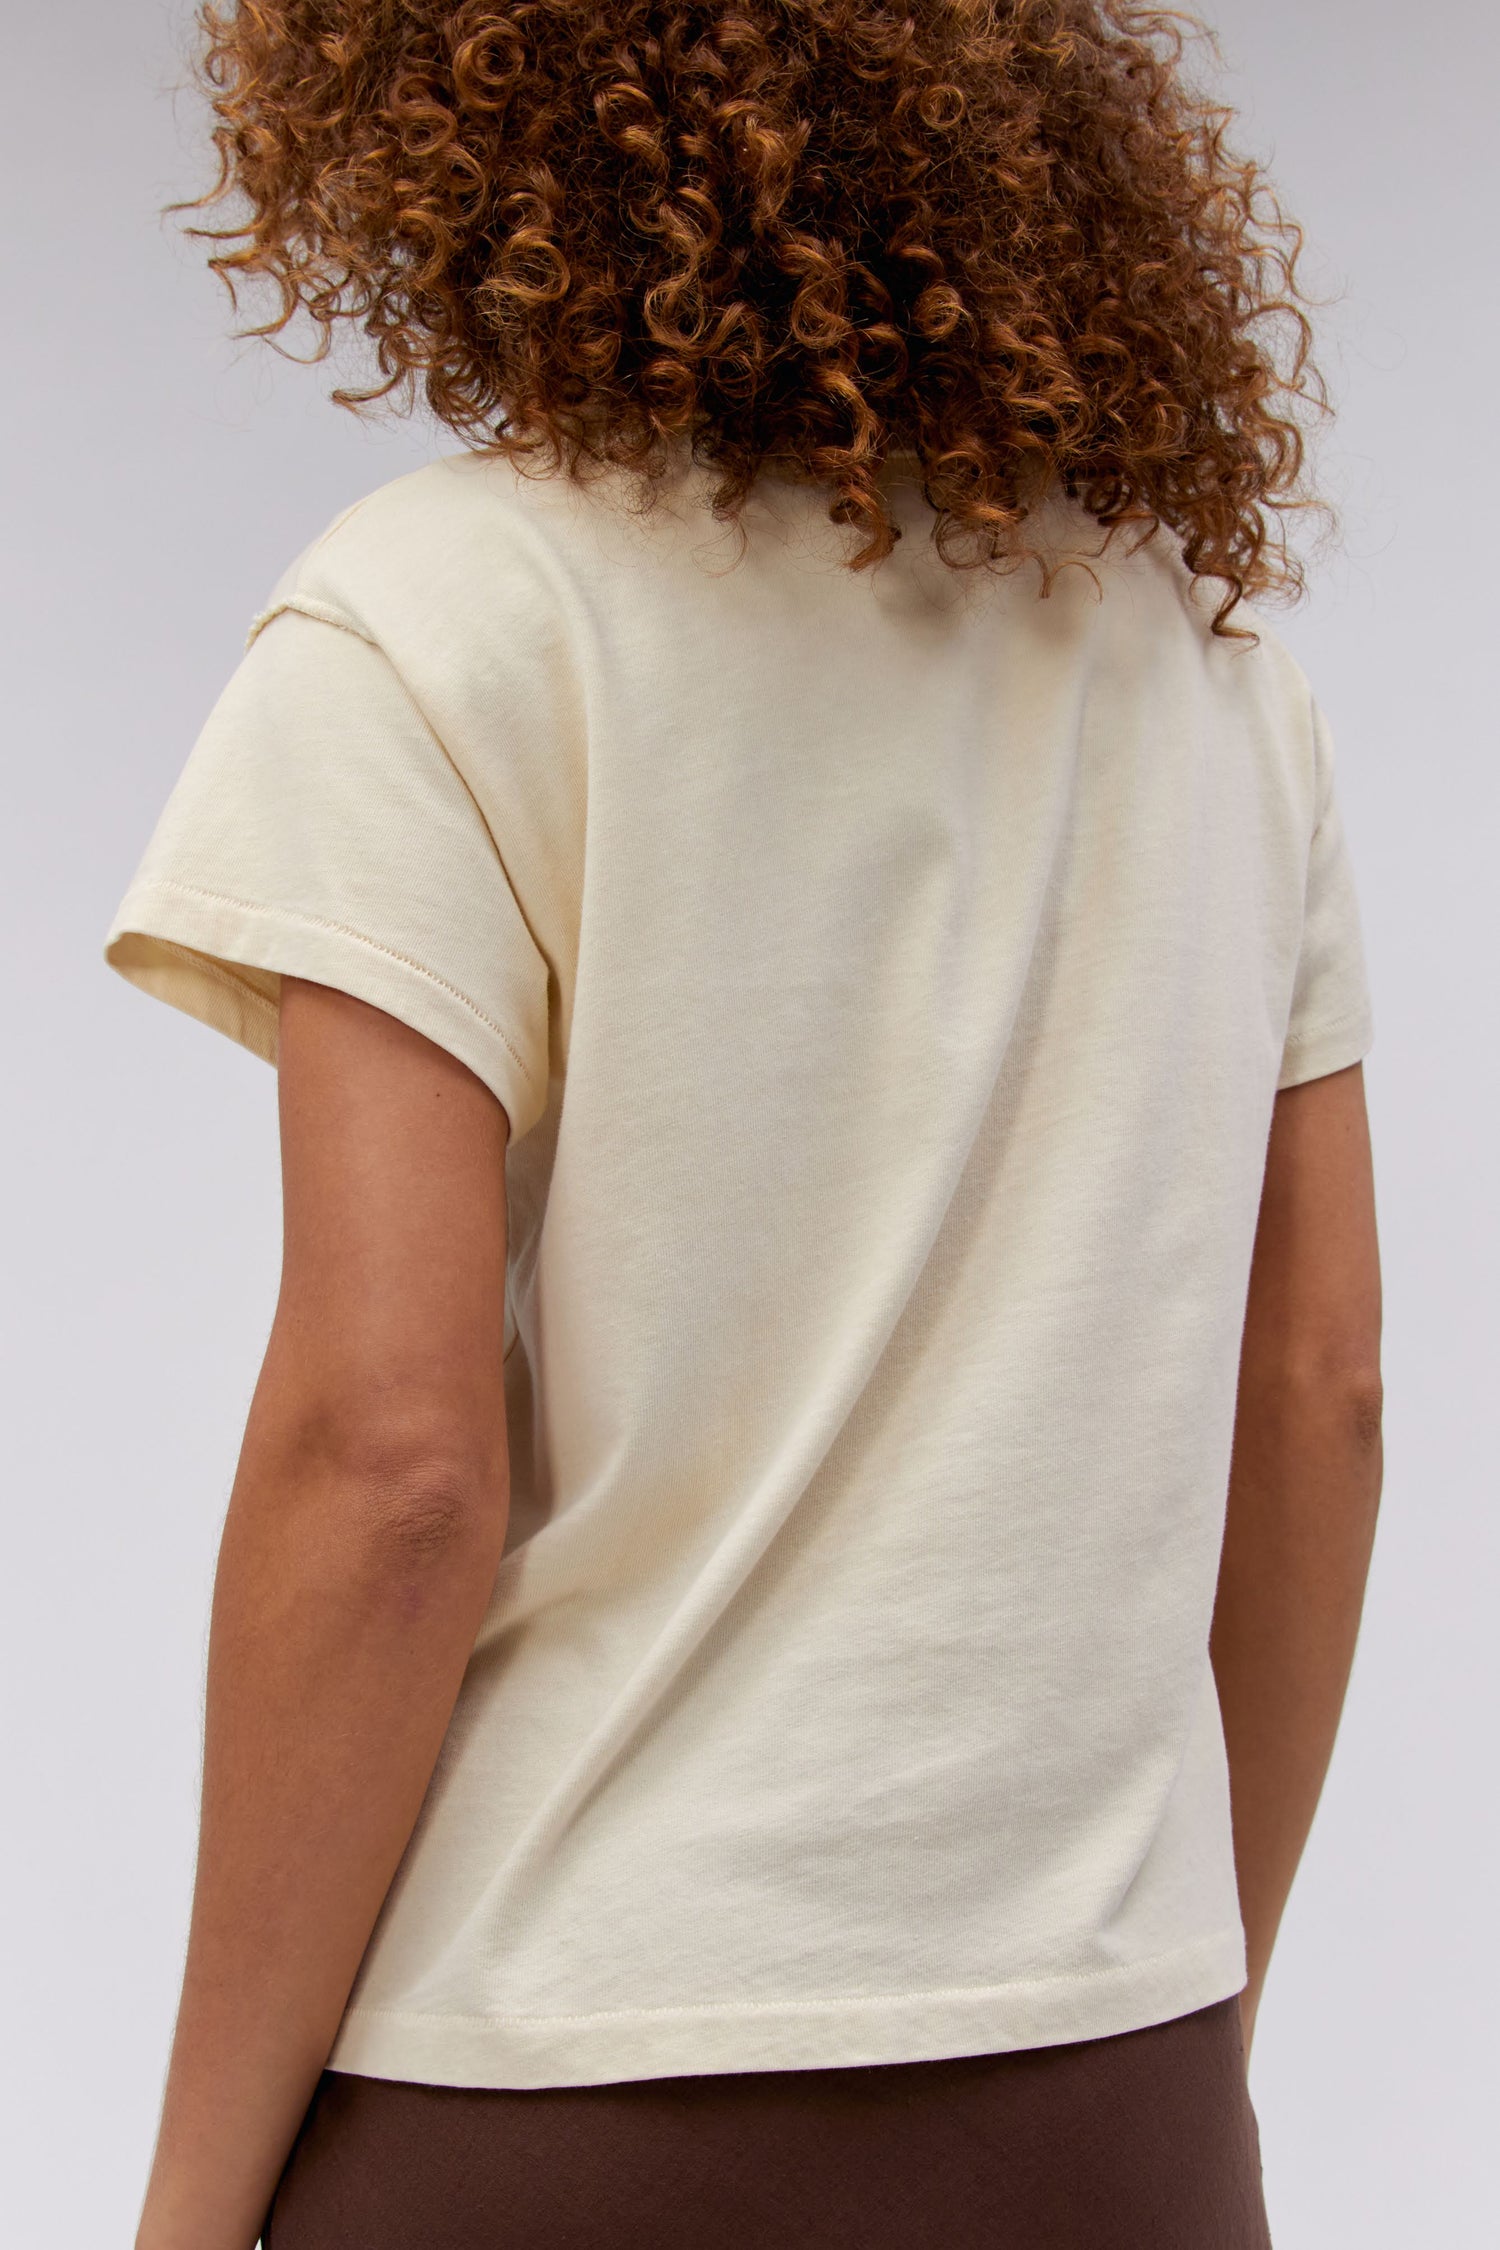 A curly-haired model featuring a parchment-colored tee stamped with the band's name, designed with a graphic of leaves, flowers, and butterflies on the center.